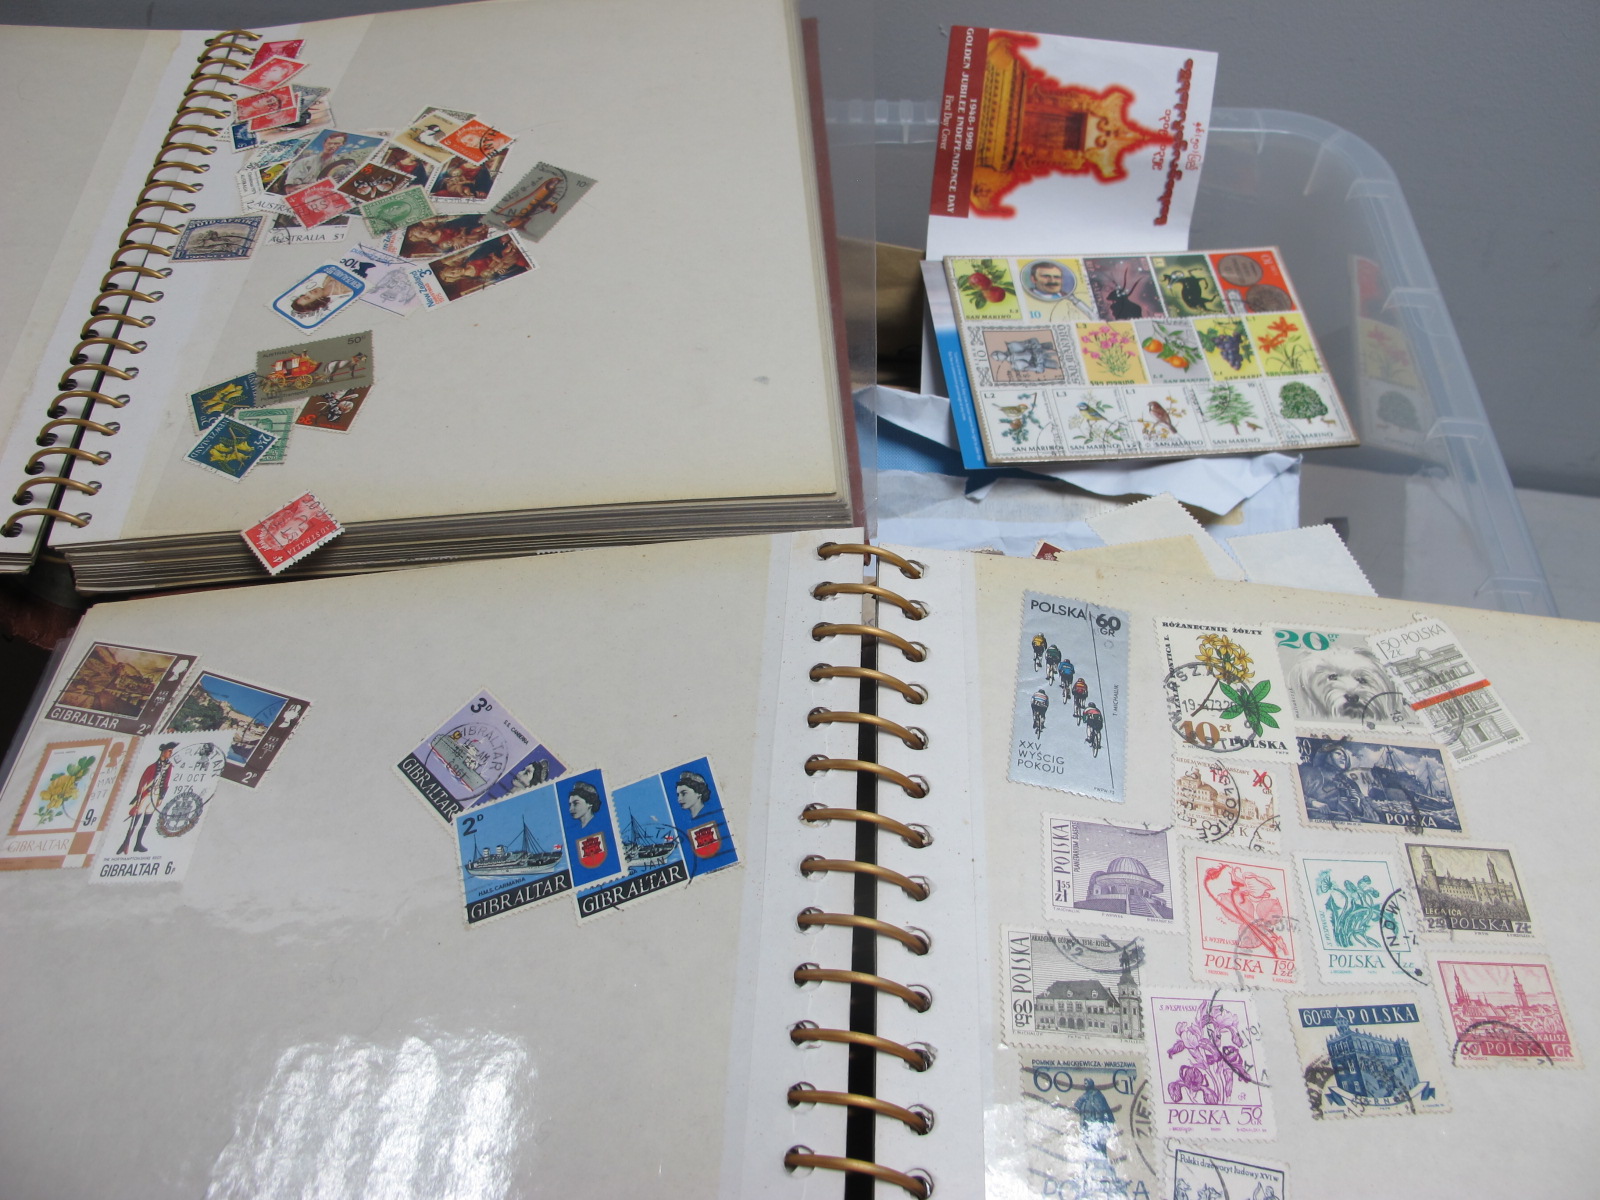 Over 260 GB FDC's From 1978 to 1997, plus a small quantity of Worldwide stamps in two 'Photo' albums